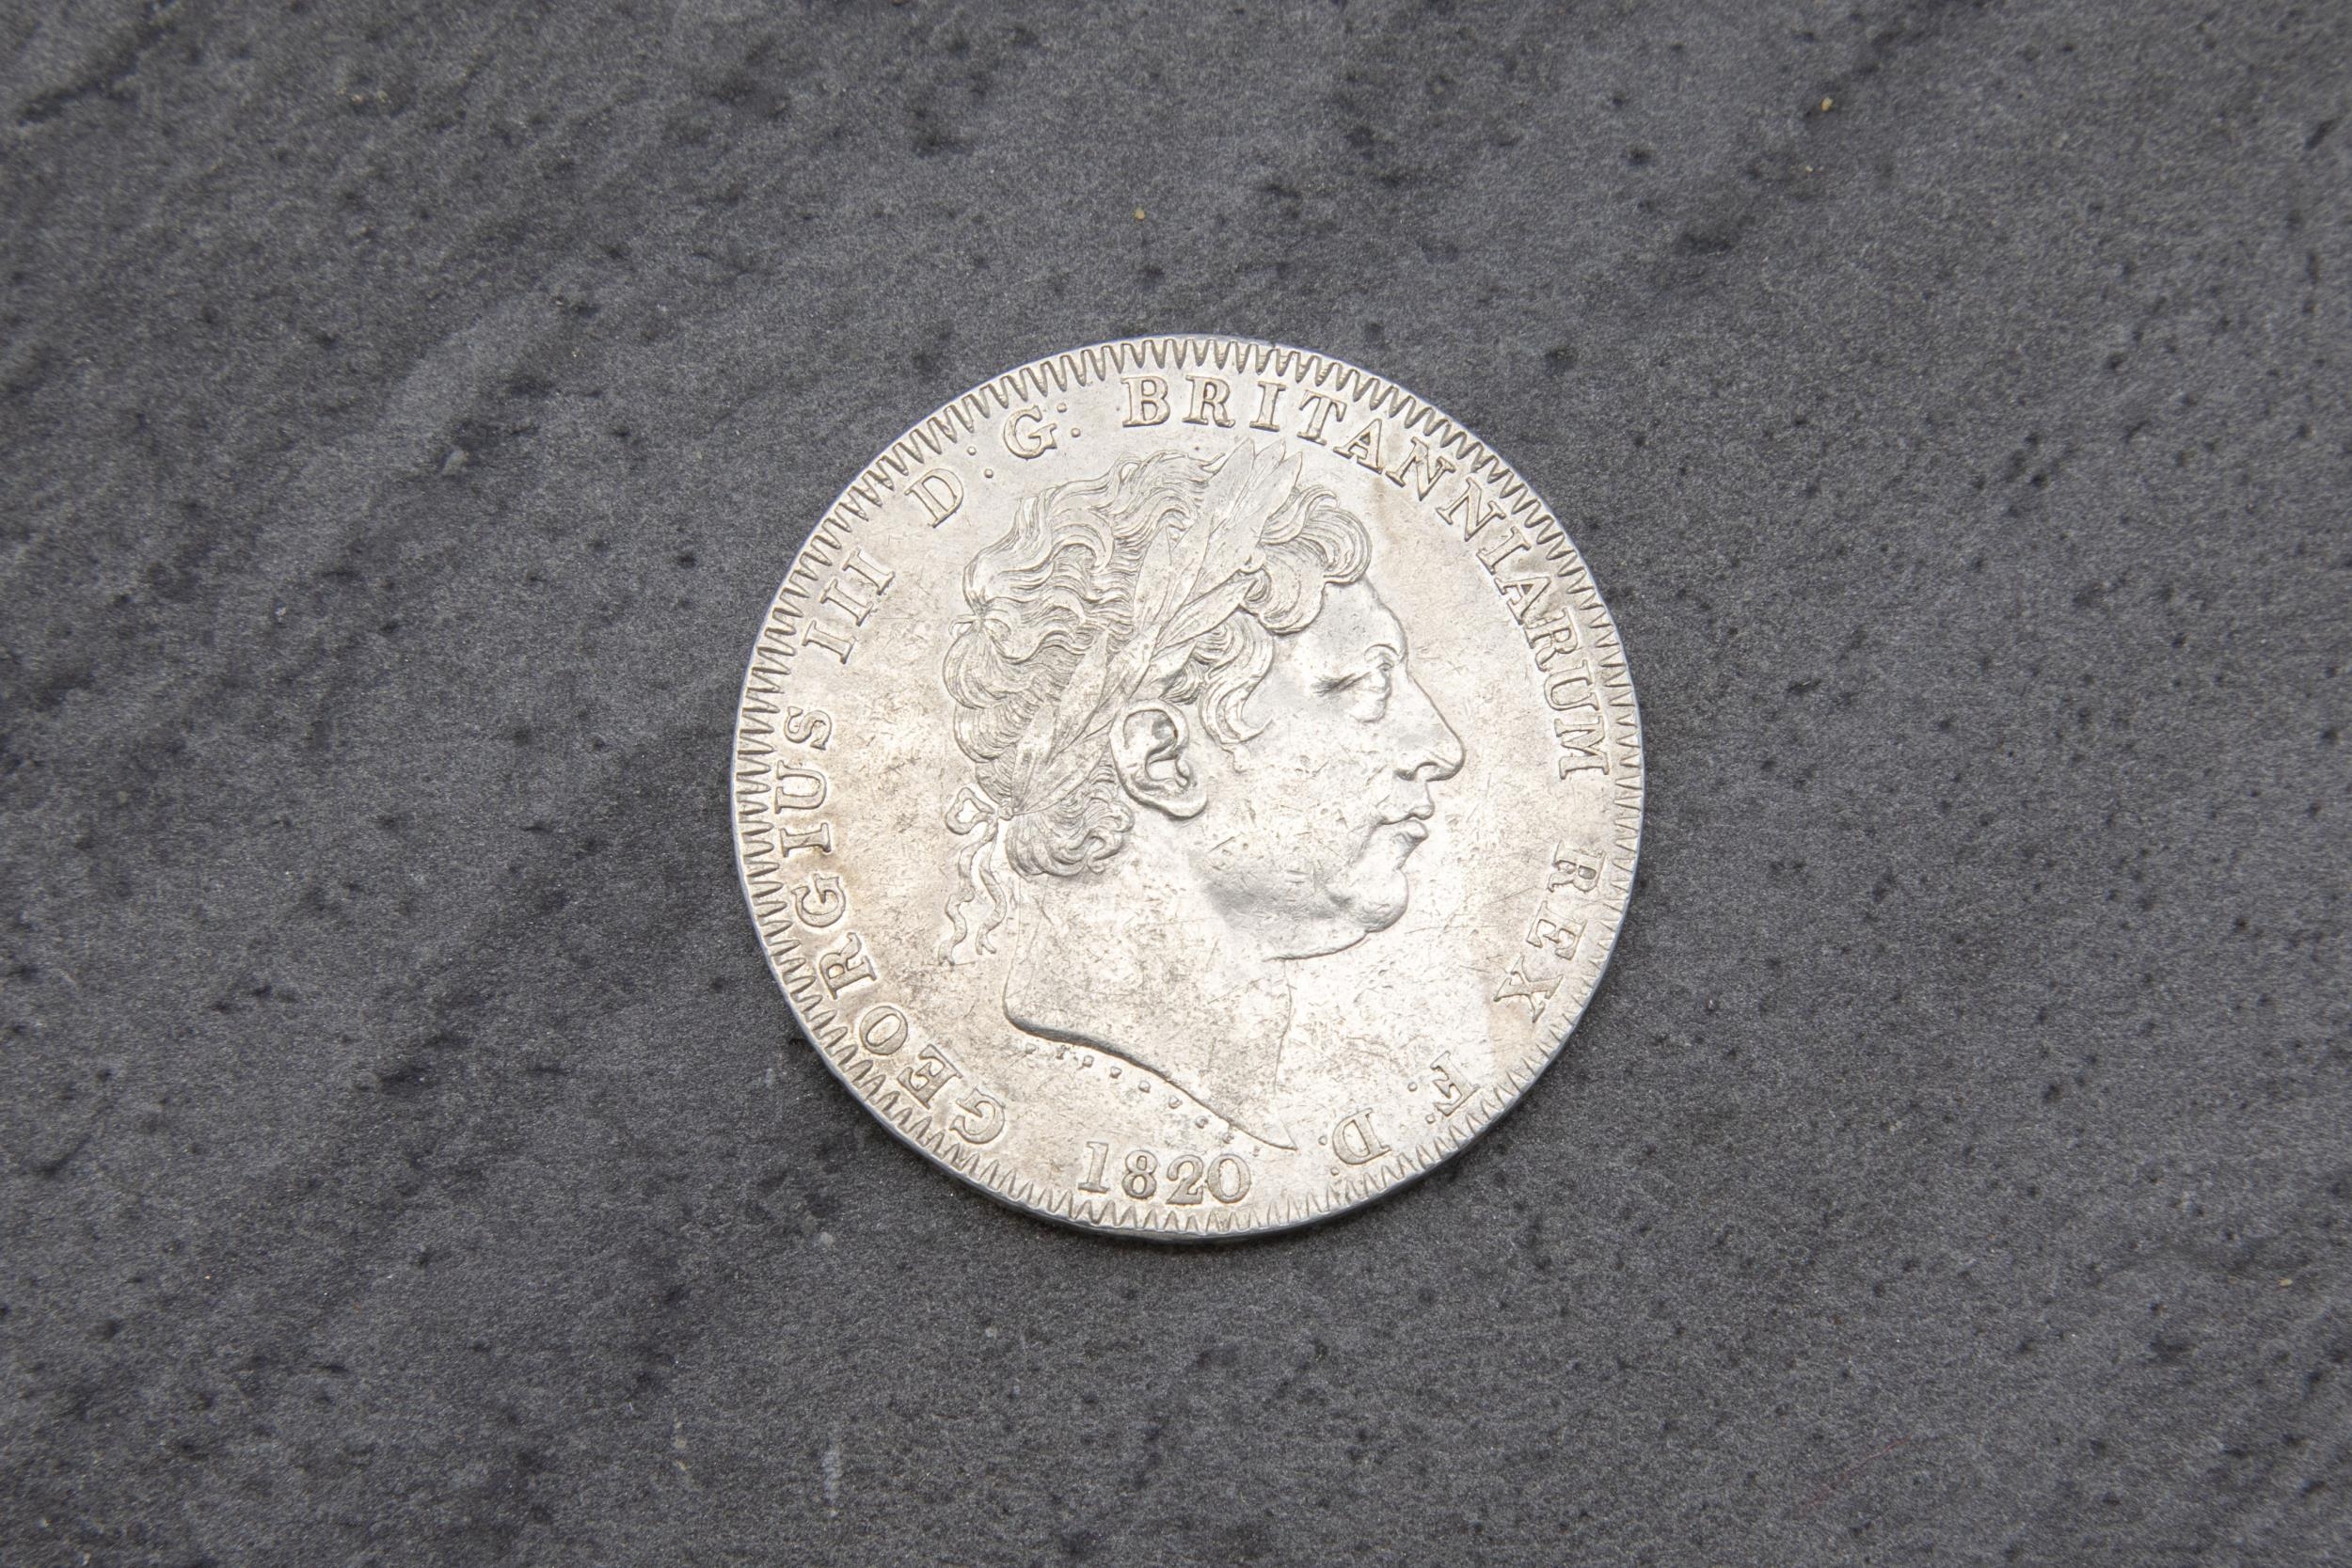 George III silver 1820 LX crown coin